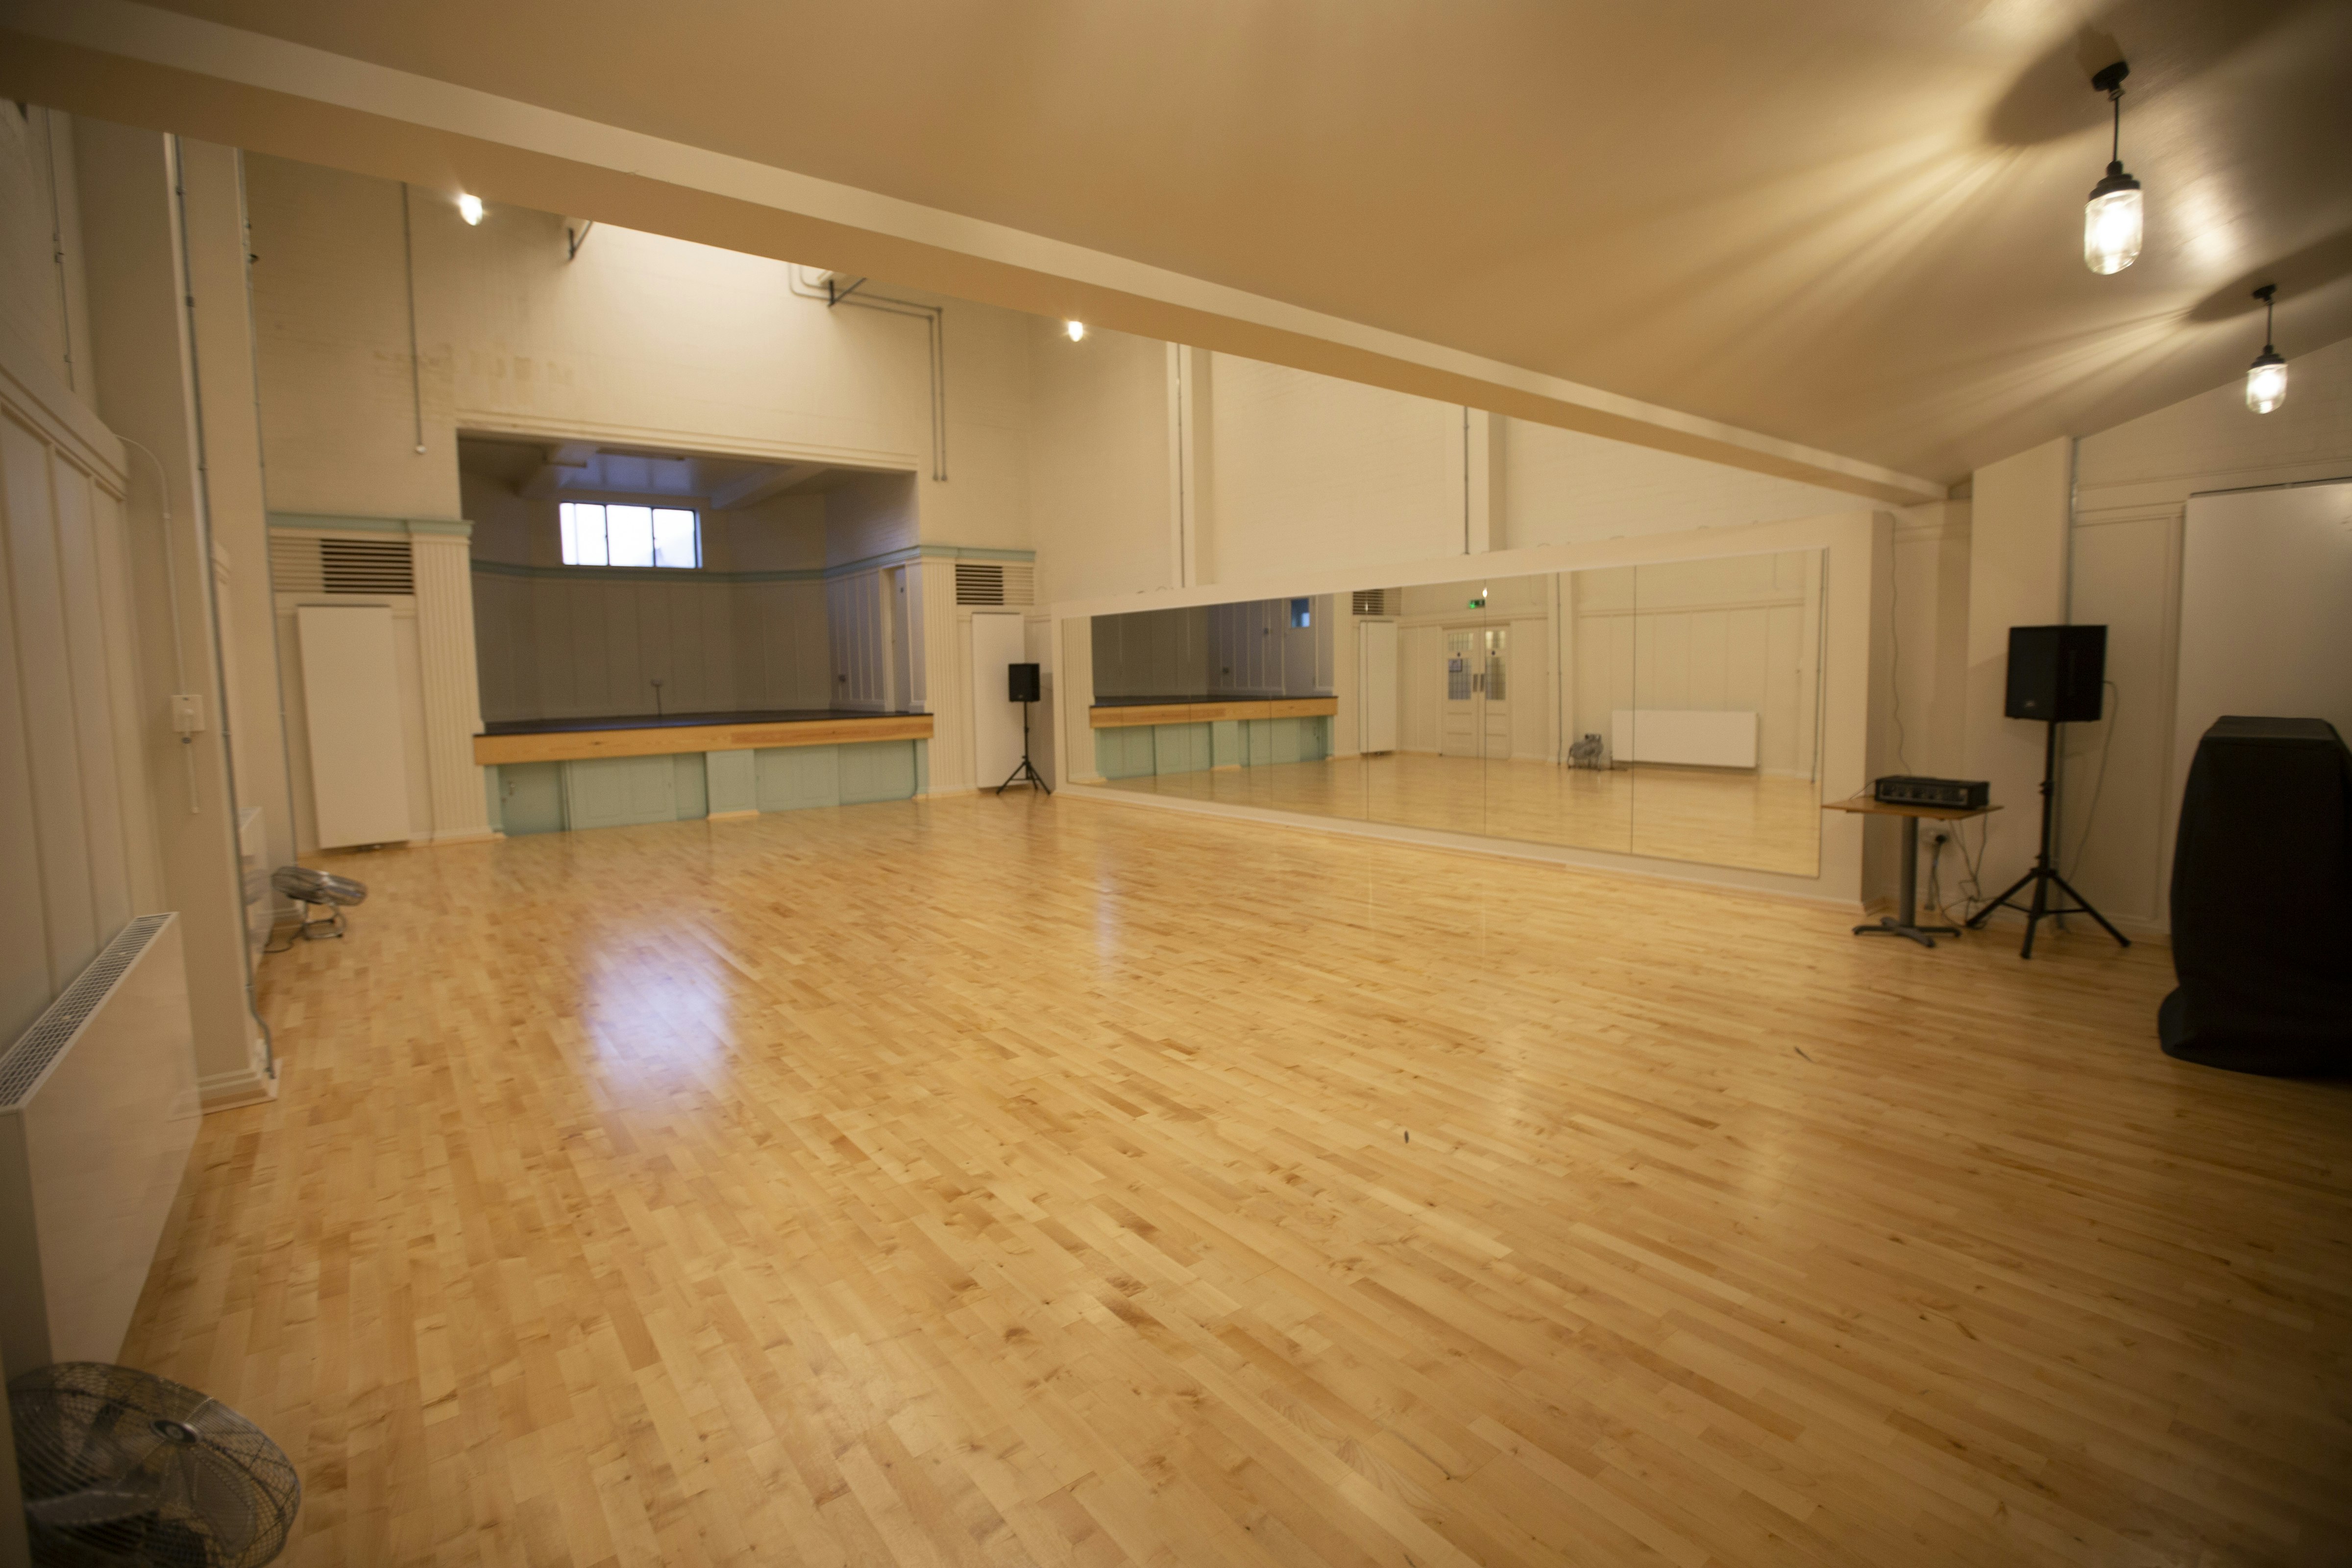 Recording Studios Venues in London - The International College of Musical Theatre 